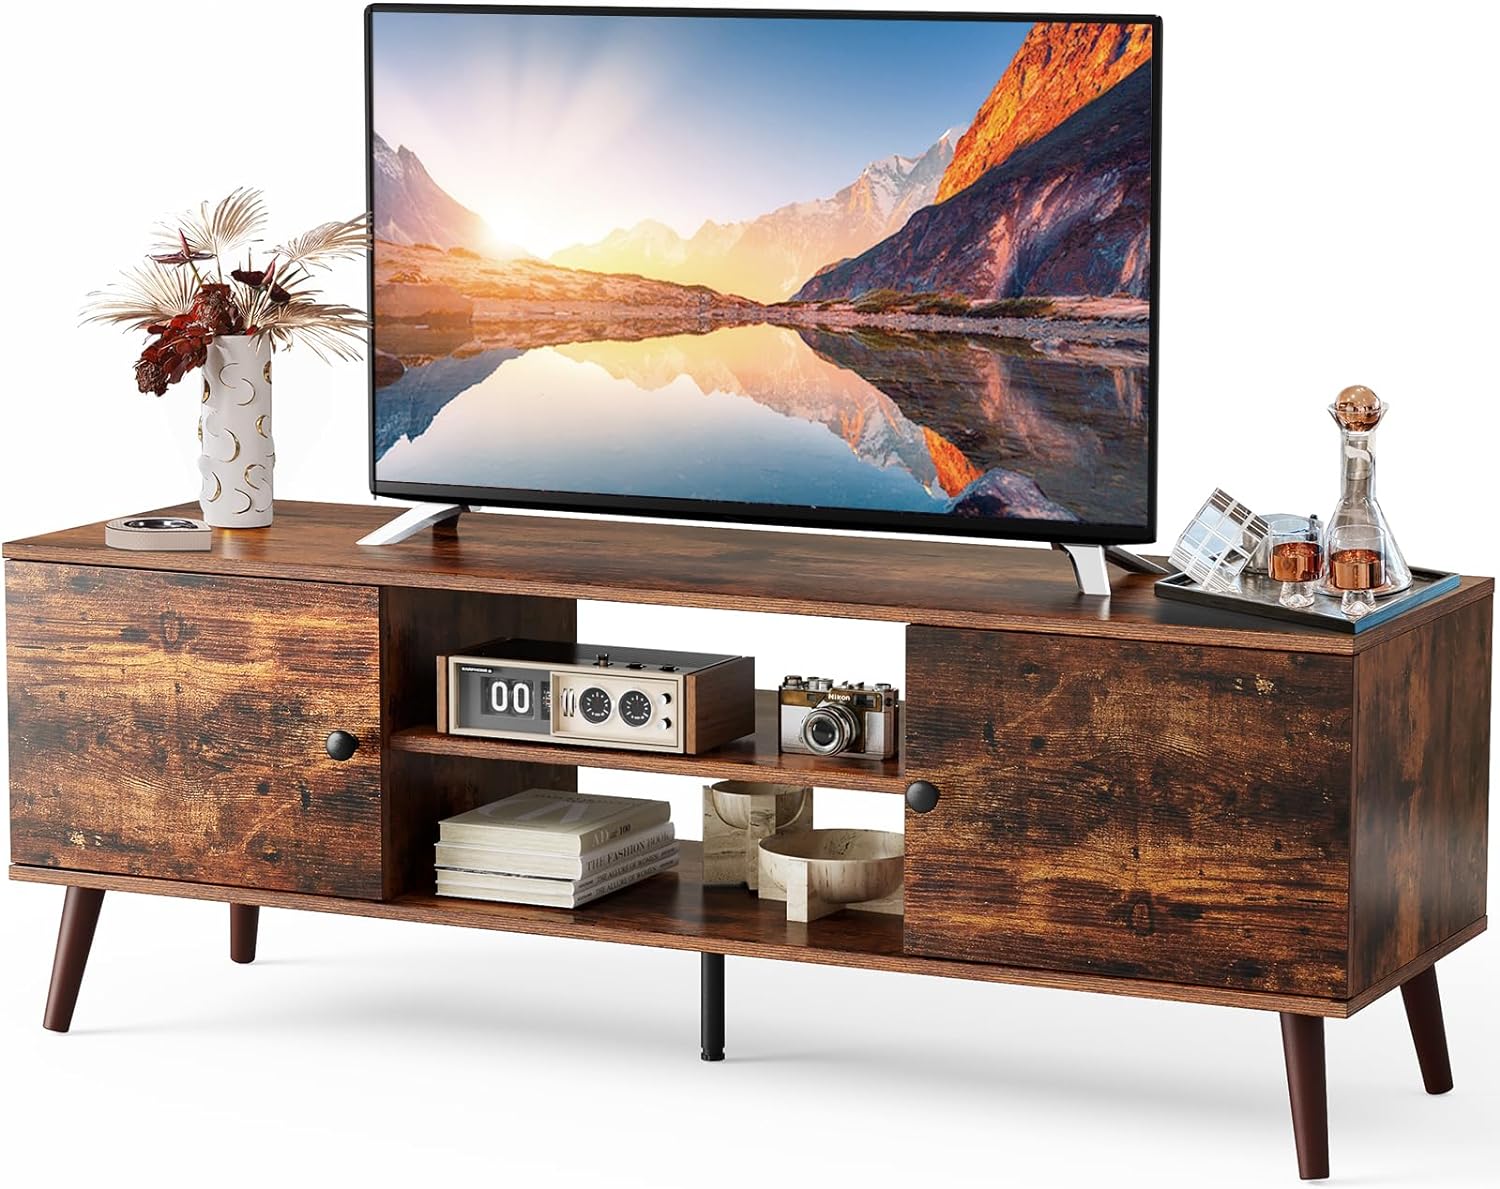 The set up was kind of easy with 2 people. Once assembled, the TV stand looked good. It seems to be sturdy for a 36 inch tv. I like the drawers for storage. It works well in a guest bedroom. I think this is a good value for the quality and price.